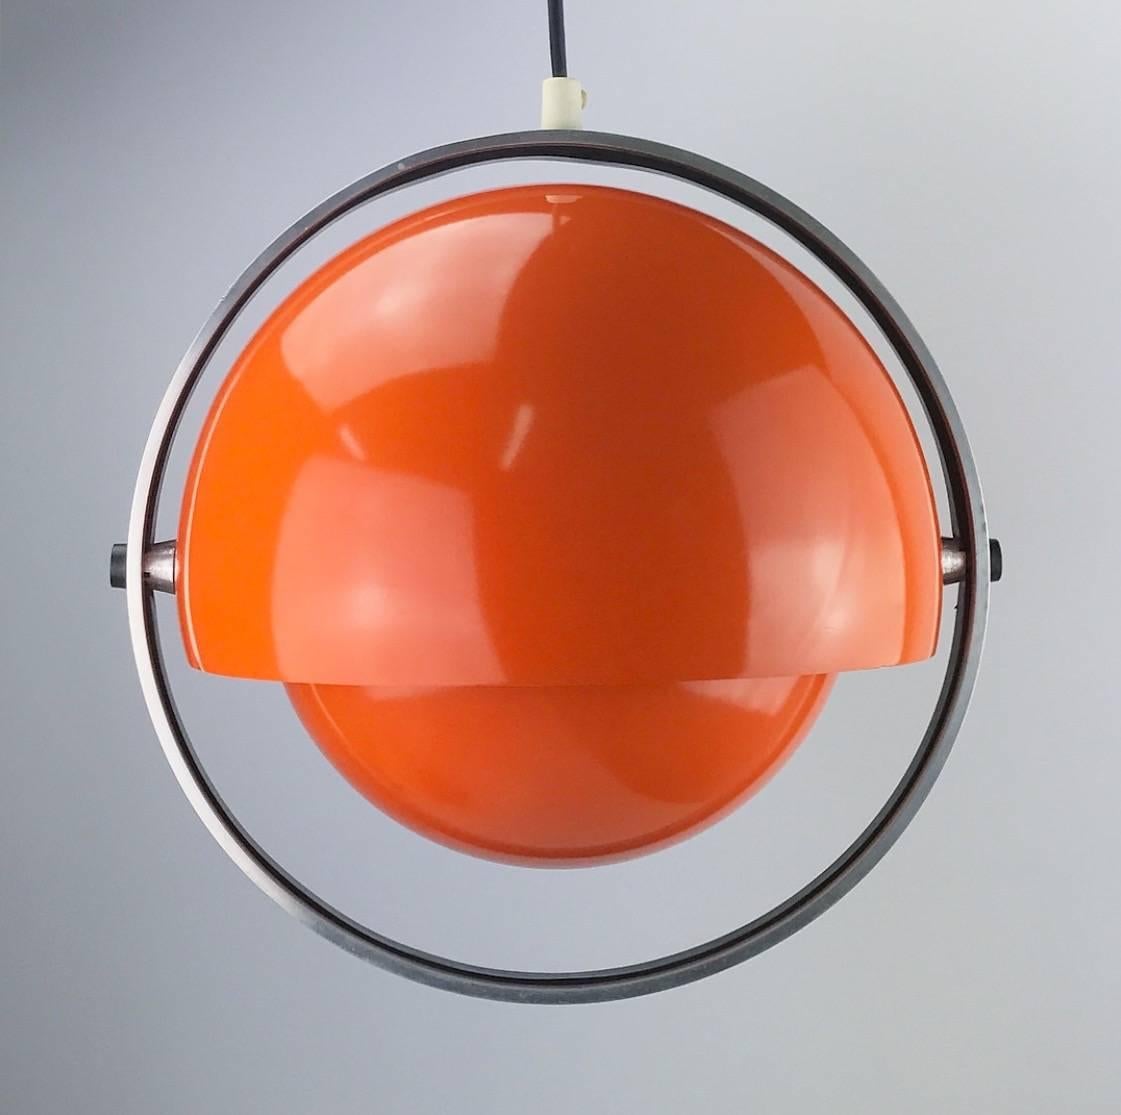 Ceiling pendant made by Flemming Brylle and Preben Jacobsen 1963 for quality system, Denmark. 

This rare ceiling light consists of two spheres which are individually attached around a outer chrome ring. Light can be distributed 360 degrees.